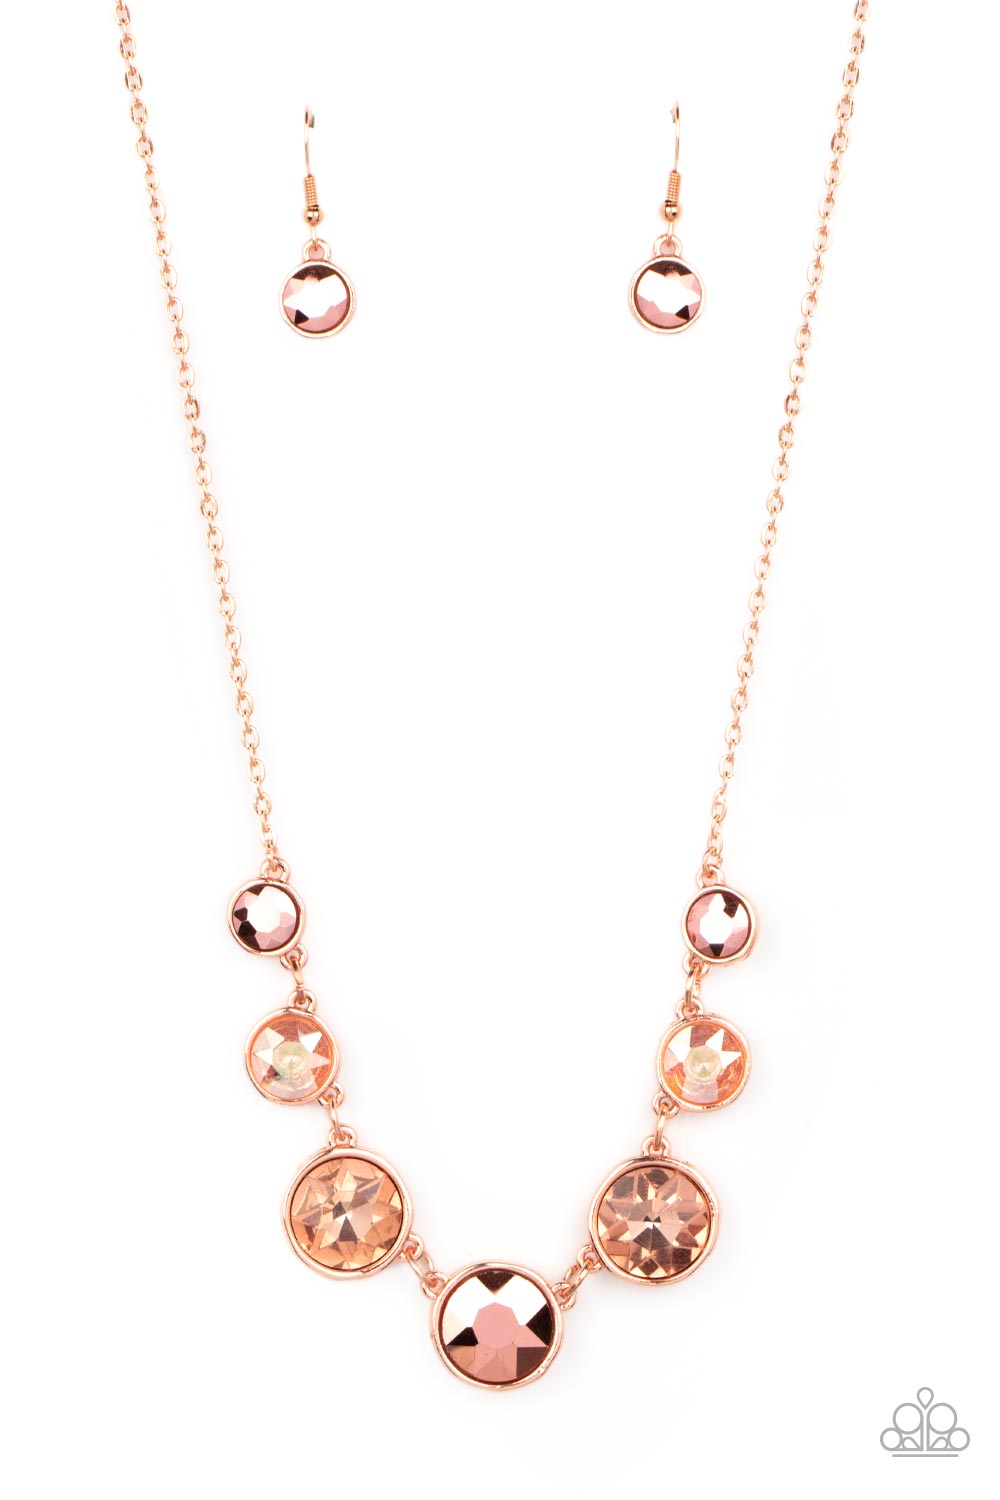 Pampered Powerhouse - Copper Paparazzi Necklace (#4701)